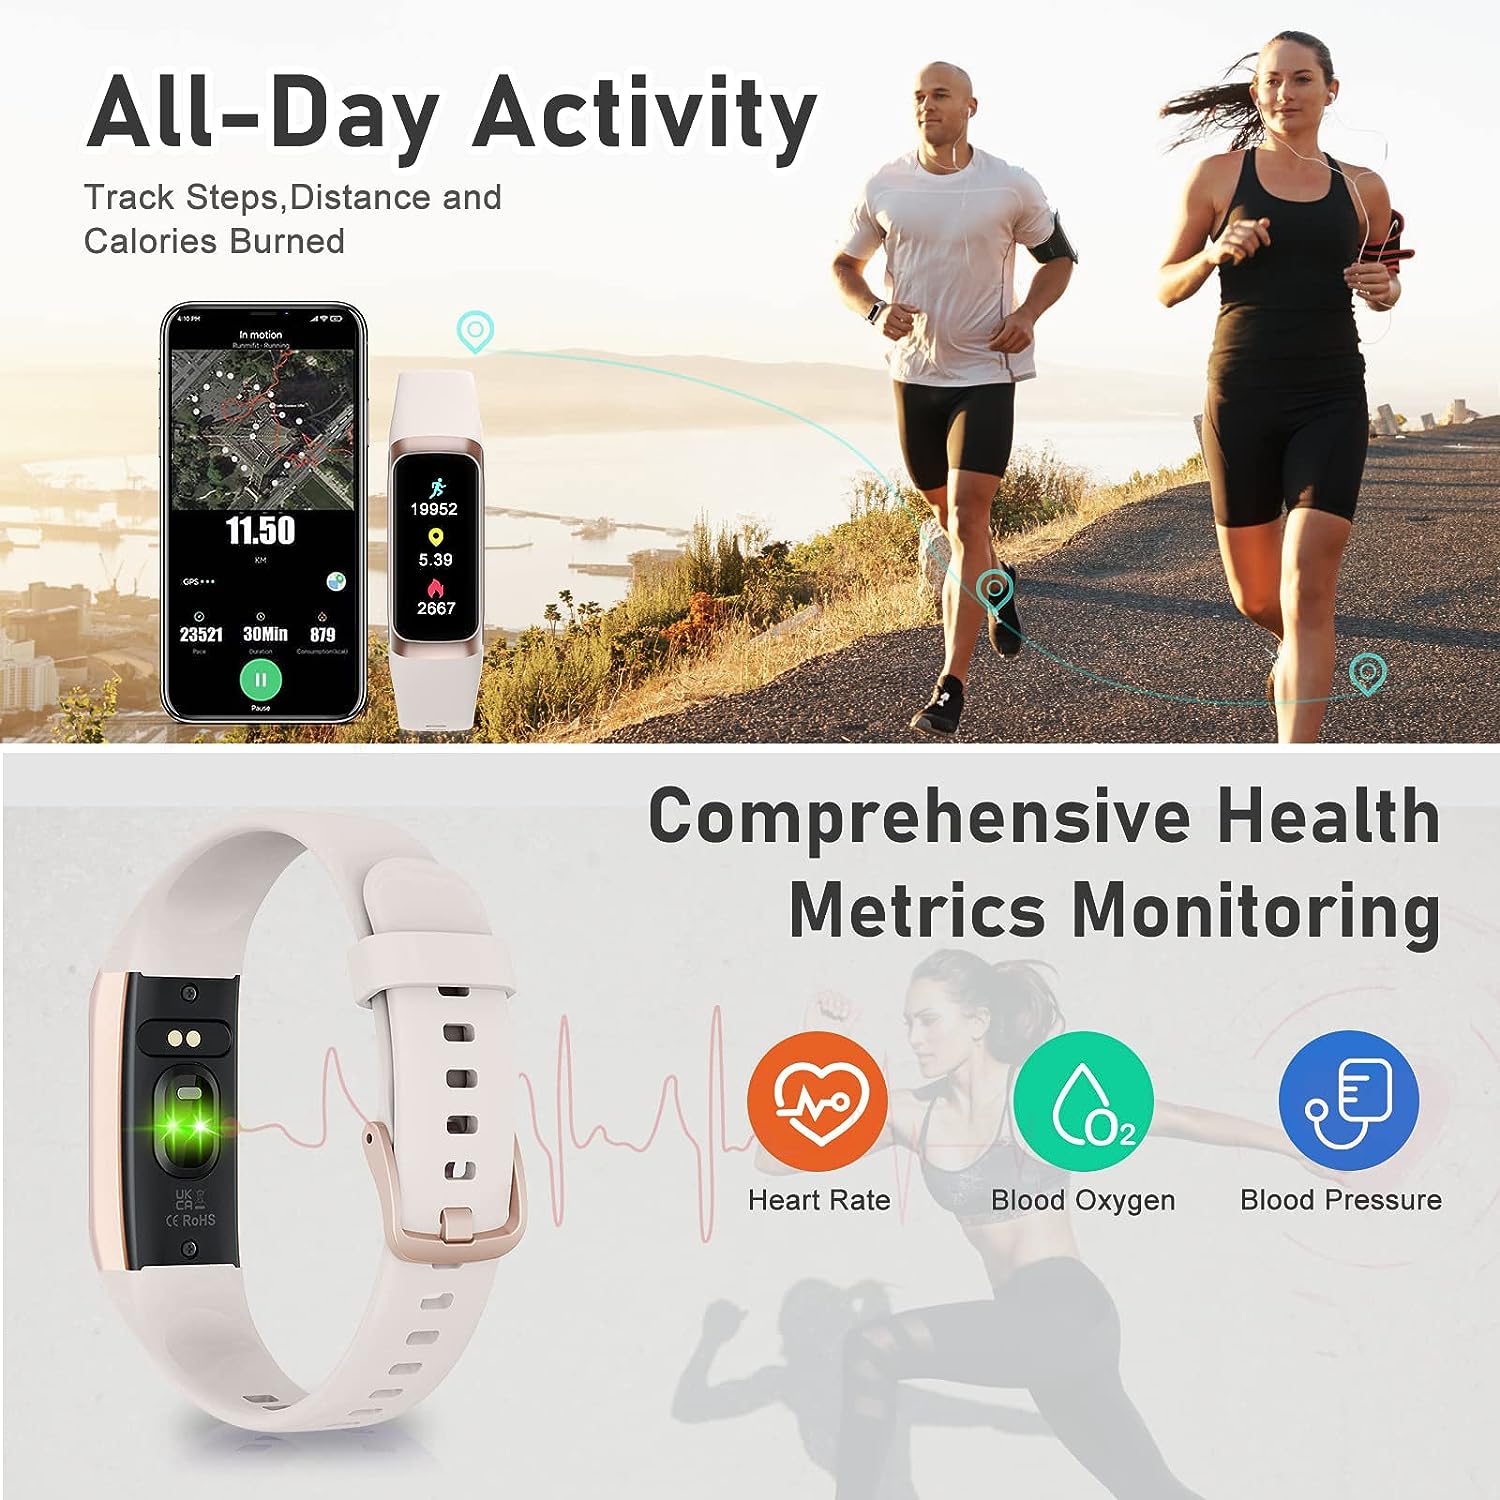 Fitness Tracker with Step Counter/Calories/Stopwatch, Activity Tracker, Health Tracker with Heart Rate Monitor, Sleep Tracker,1.10''AMOLED Touch Color Screen, Pedometer Watch for Women Men Kids